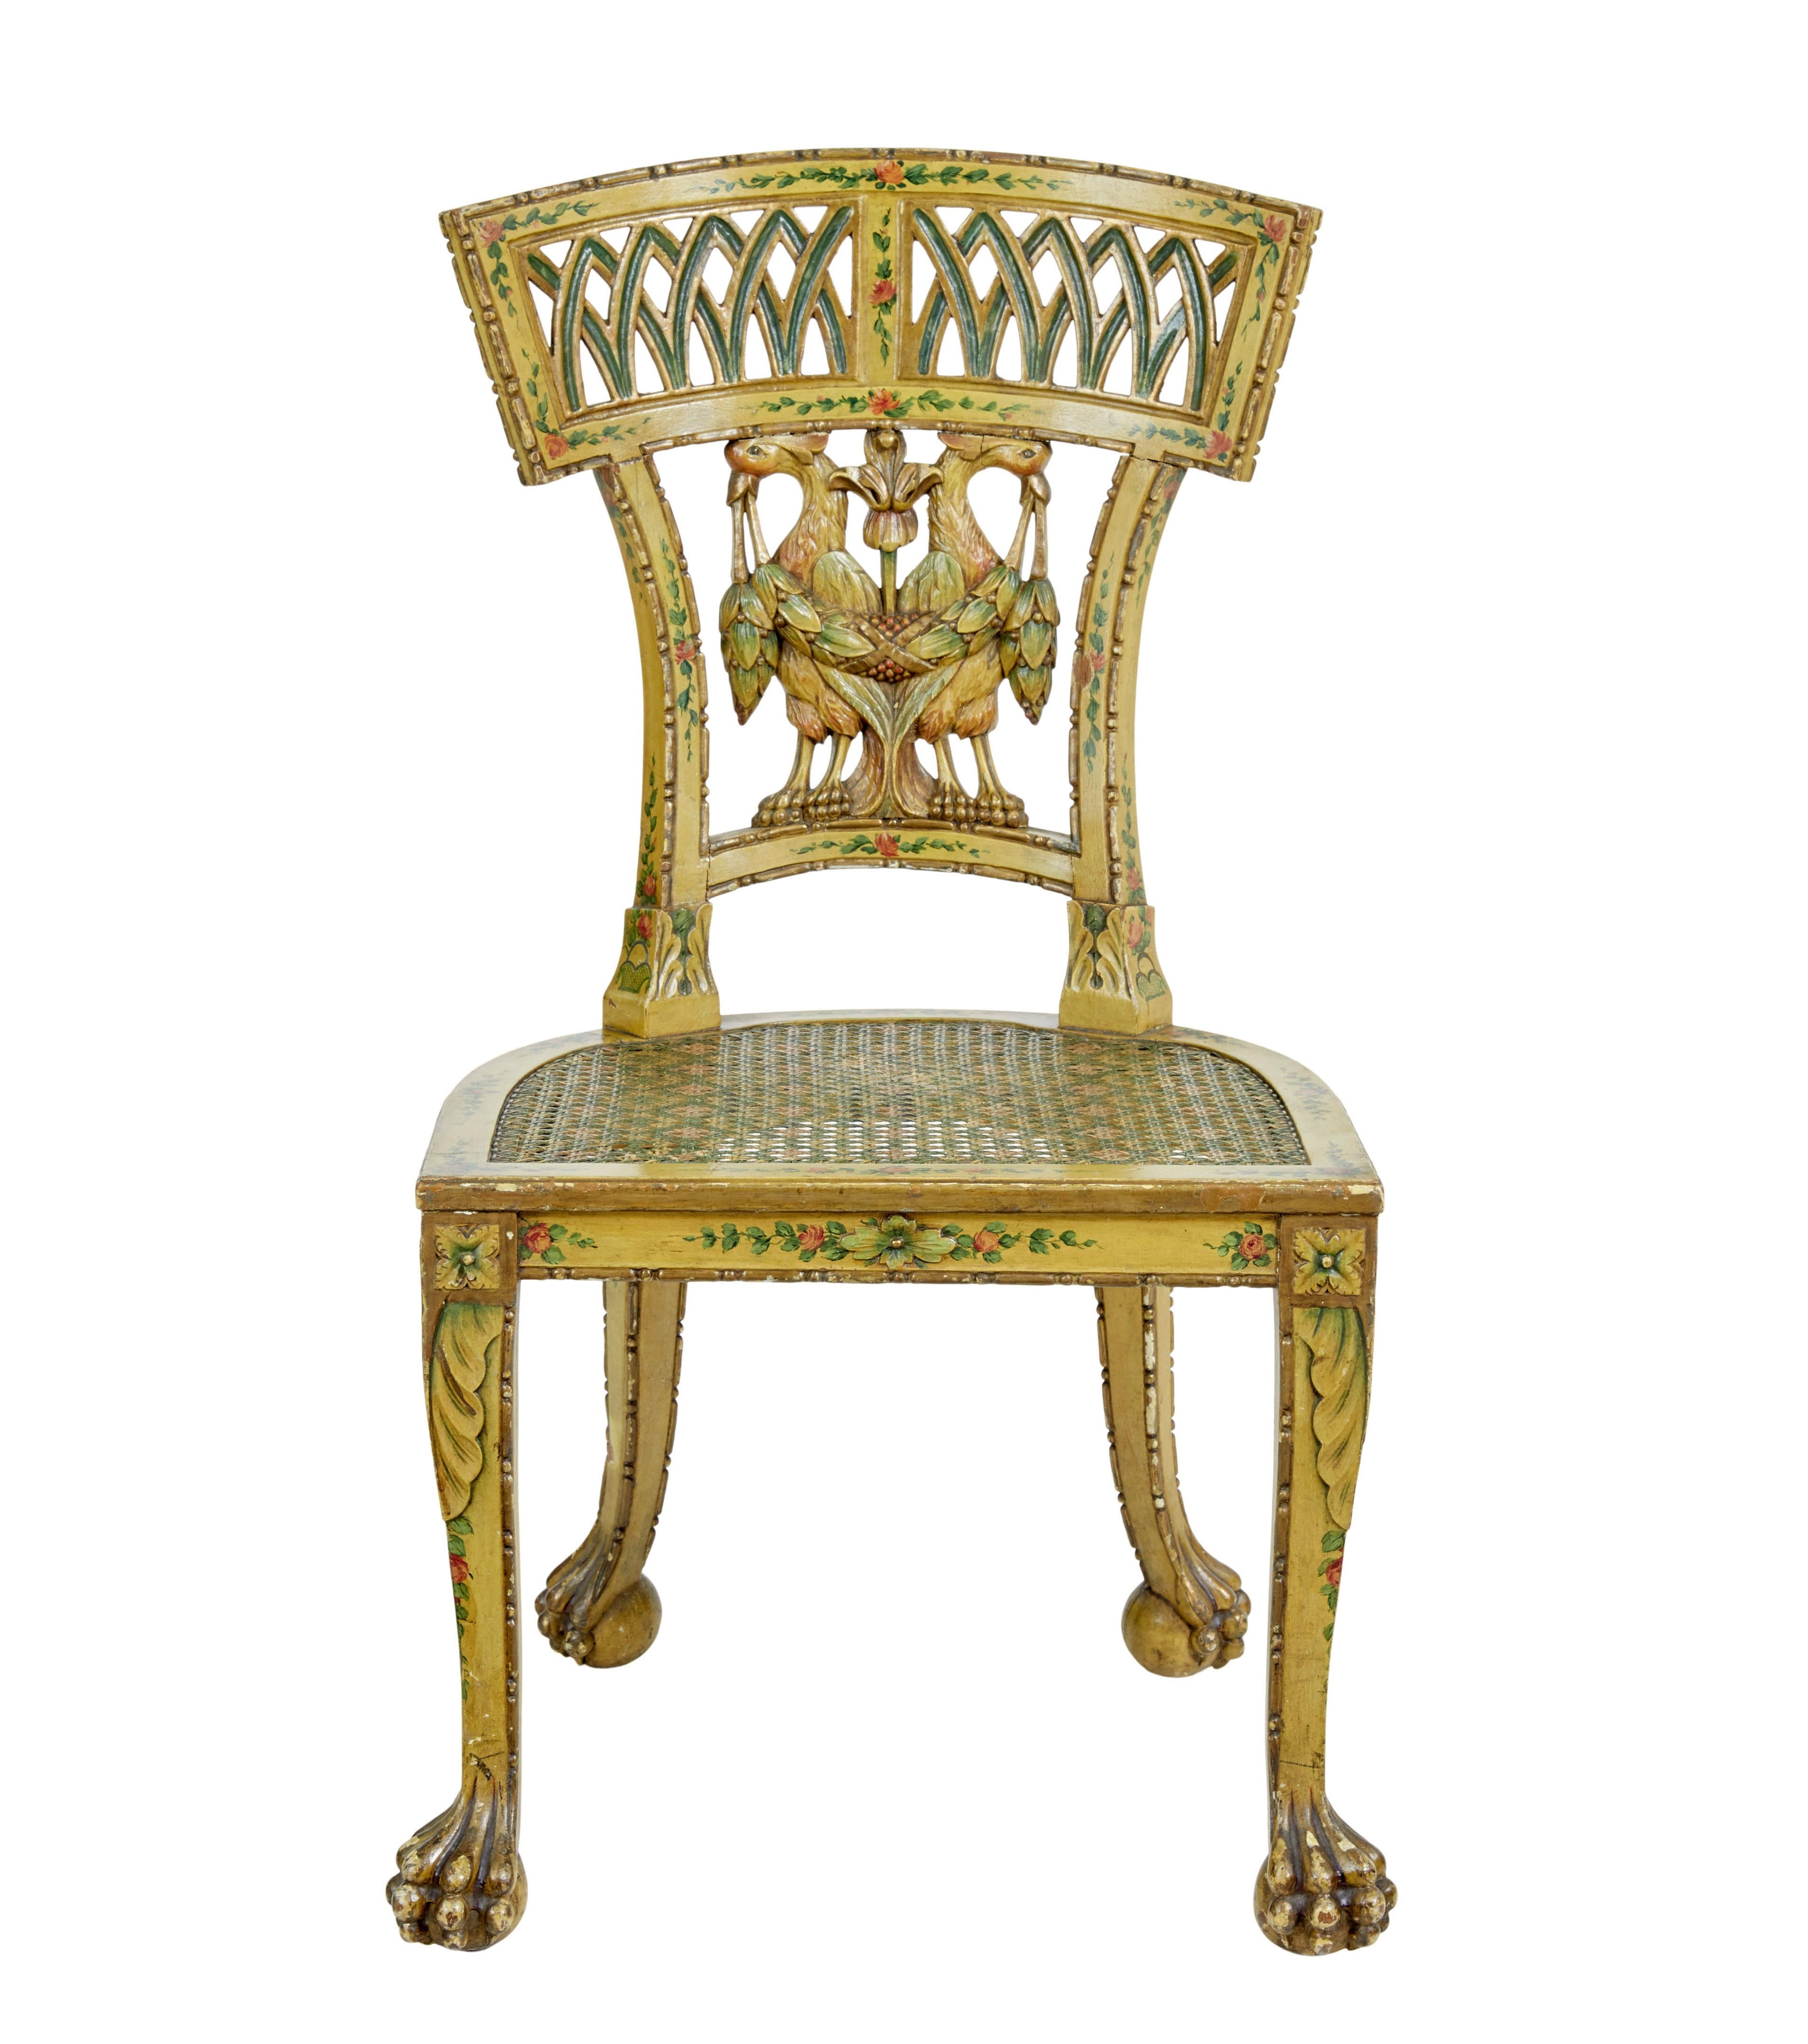 19th century biedermeier carved and painted cane chair circa 1800.

A fine example of early austrian biedermeier furniture. Shaped backrest with pierced detailing, main feature being the germanic coat of arms in the backrest. Chair is beautifully